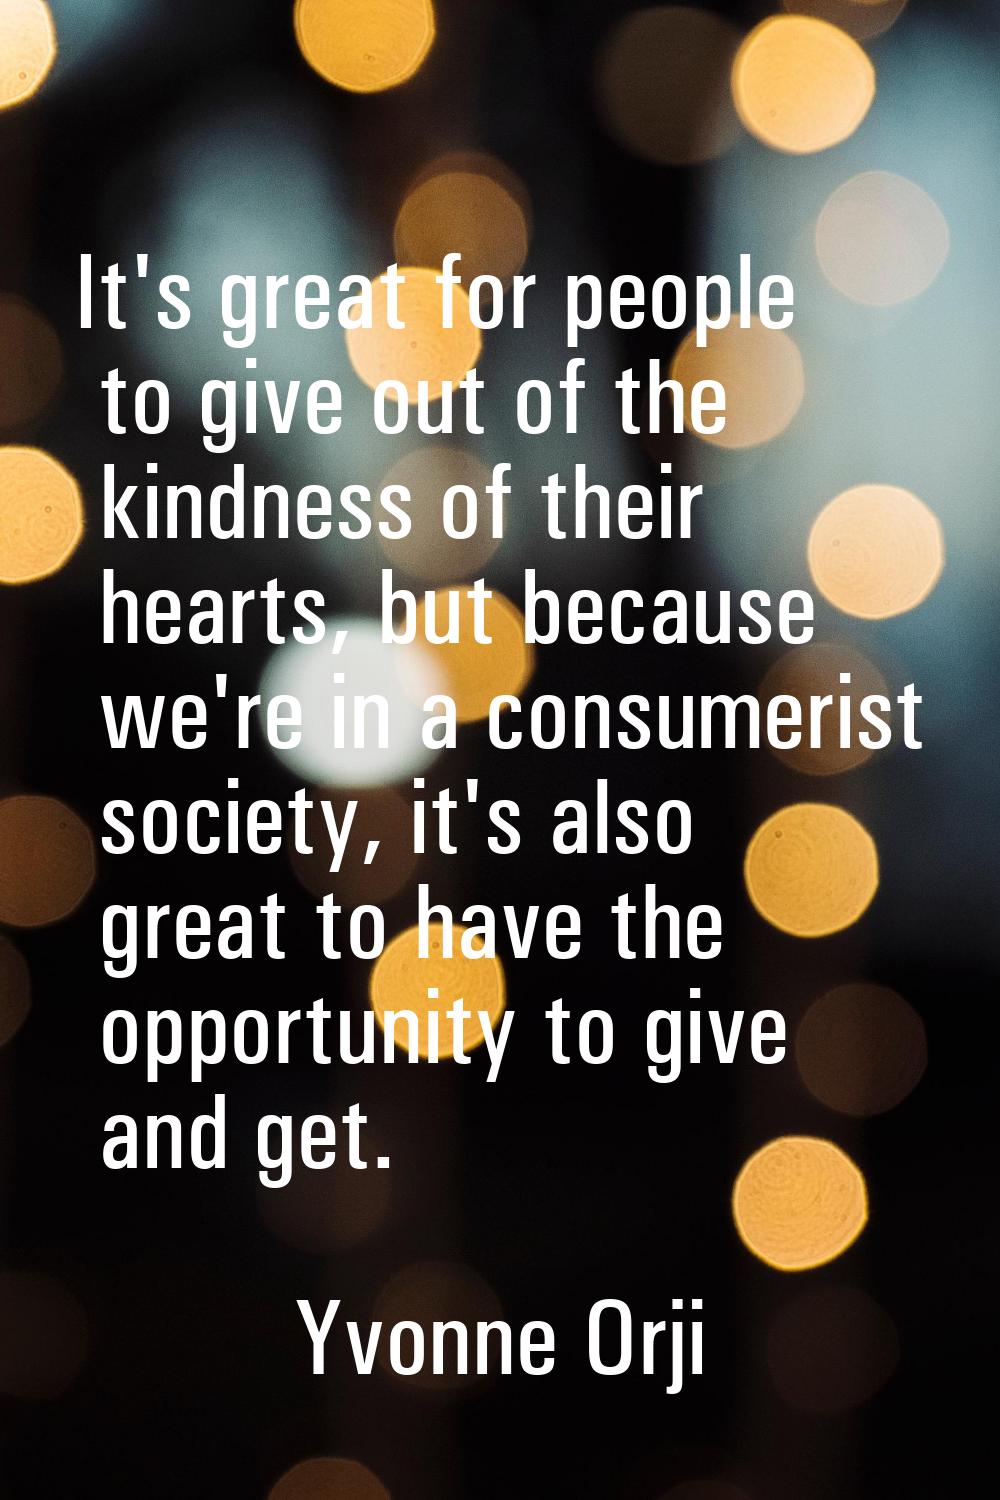 It's great for people to give out of the kindness of their hearts, but because we're in a consumeri